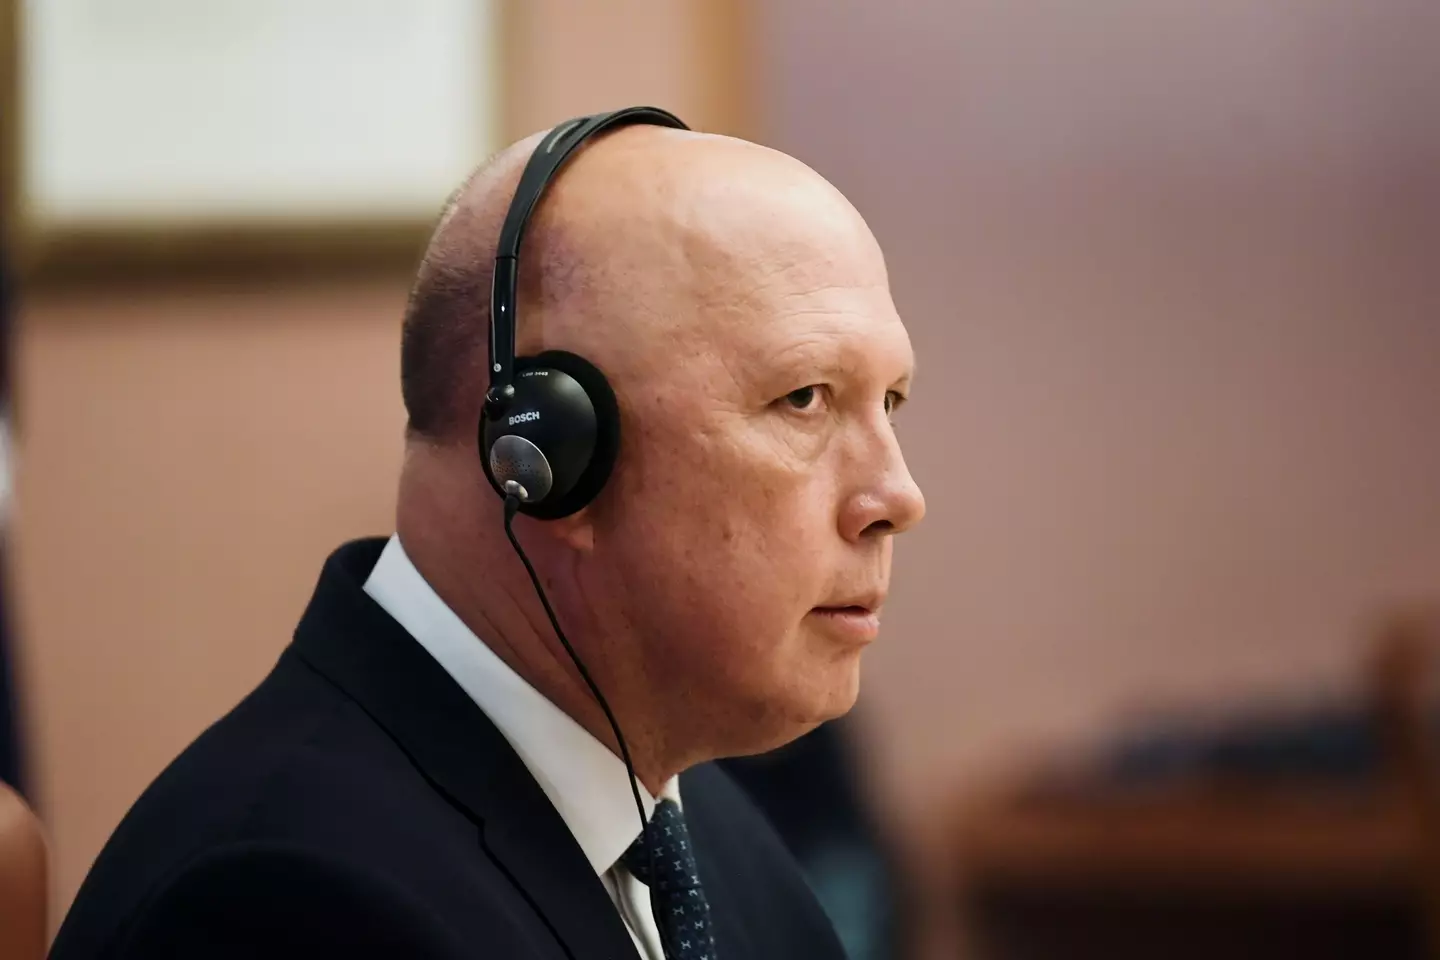 Peter Dutton vowed to establish a 'name and shame' register for paedophiles.